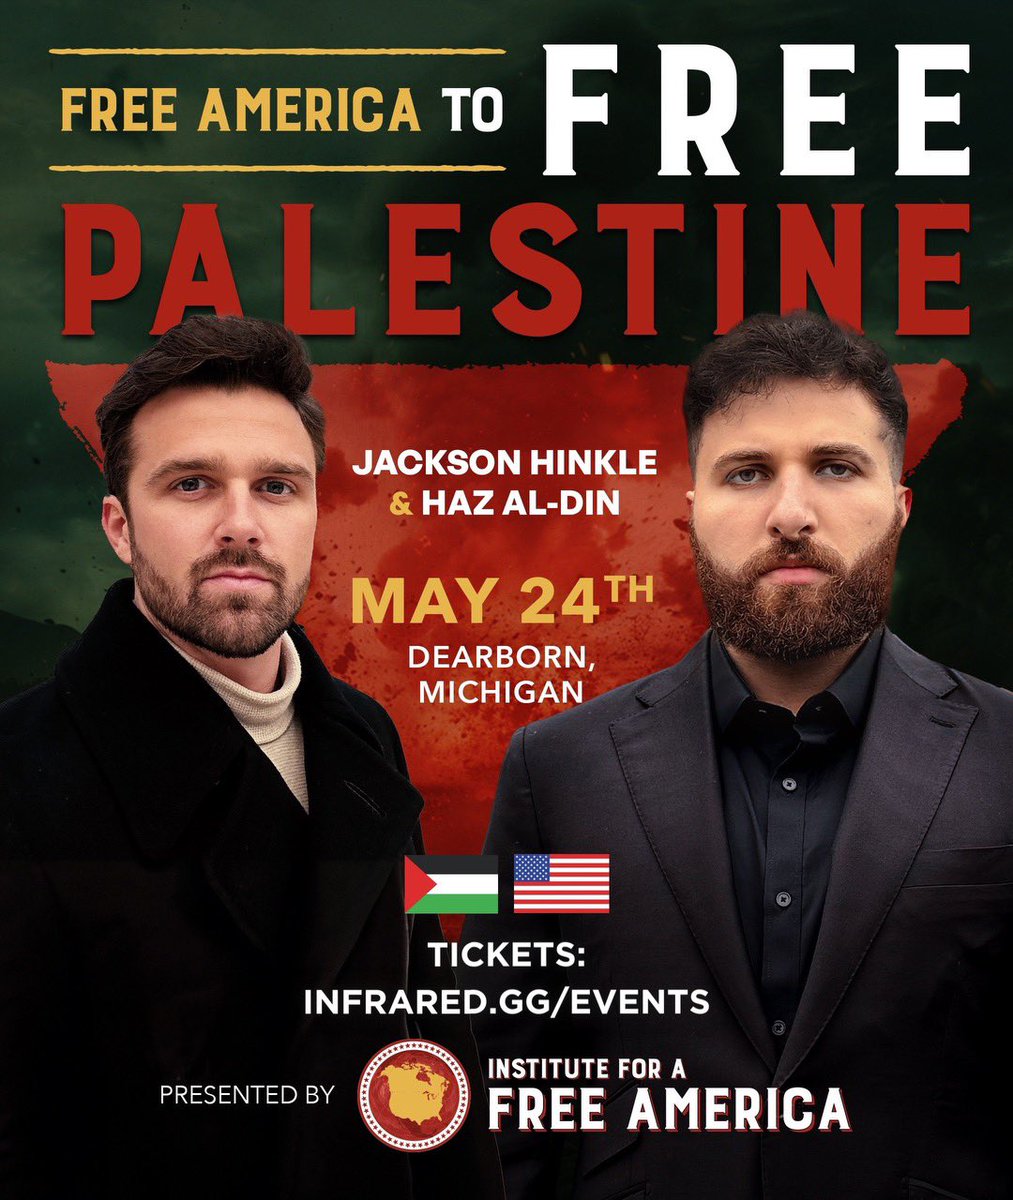 🚨🇺🇸🇵🇸 Our 'FREE PALESTINE' Dearborn, Michigan VIP TICKETS SOLD OUT. General admission tickets are STILL AVAILABLE, but are going quick. Get them through the link in my bio, going to be a great night!